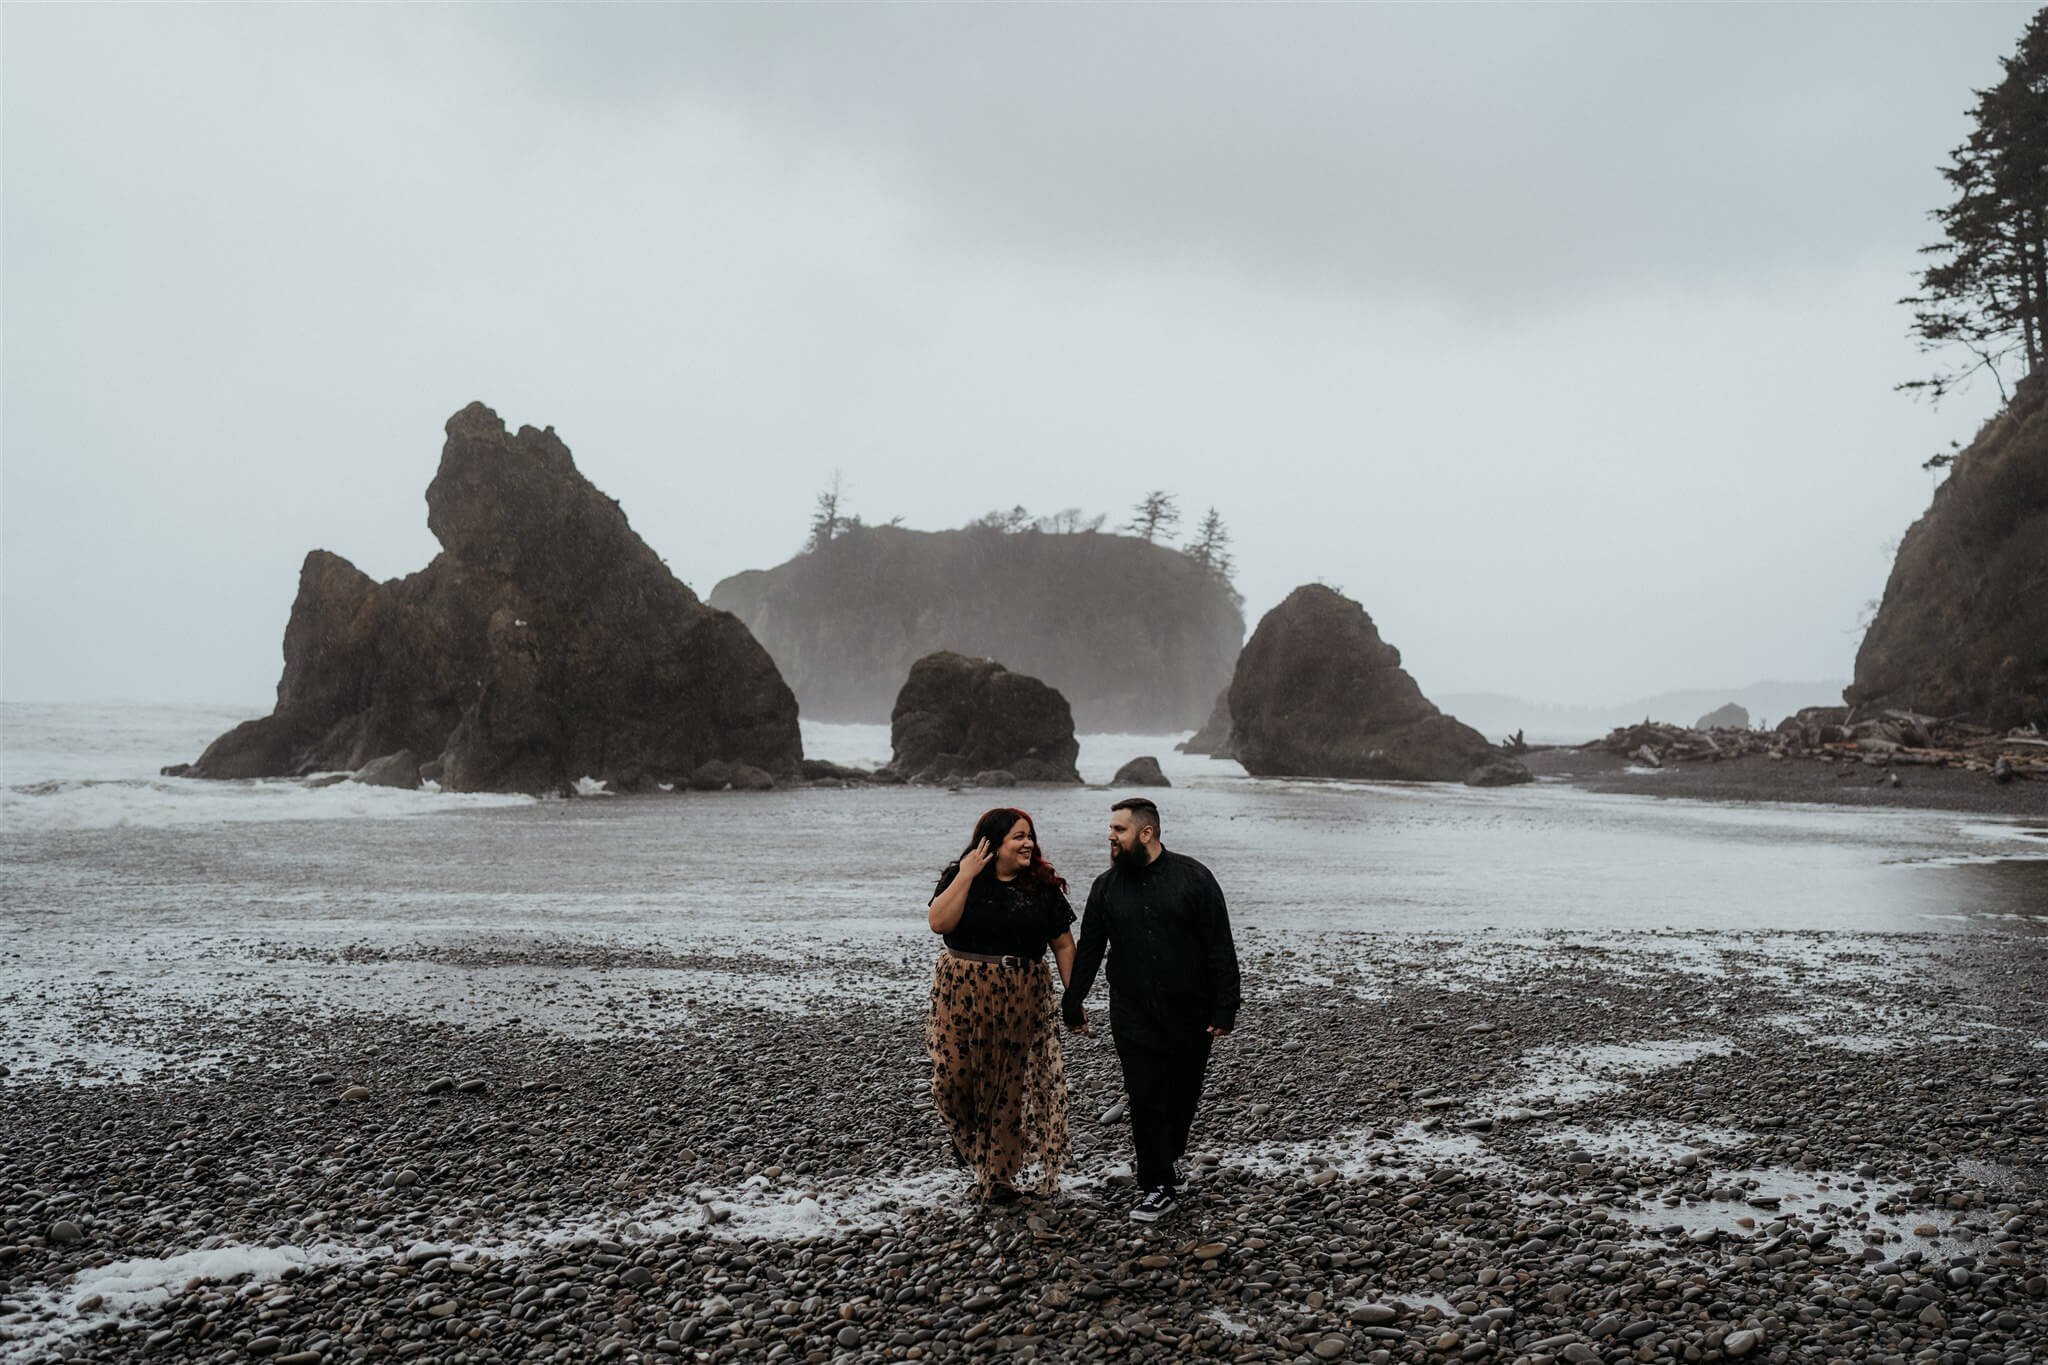 Halloween engagement photos at Ruby Beach in Olympic National Park